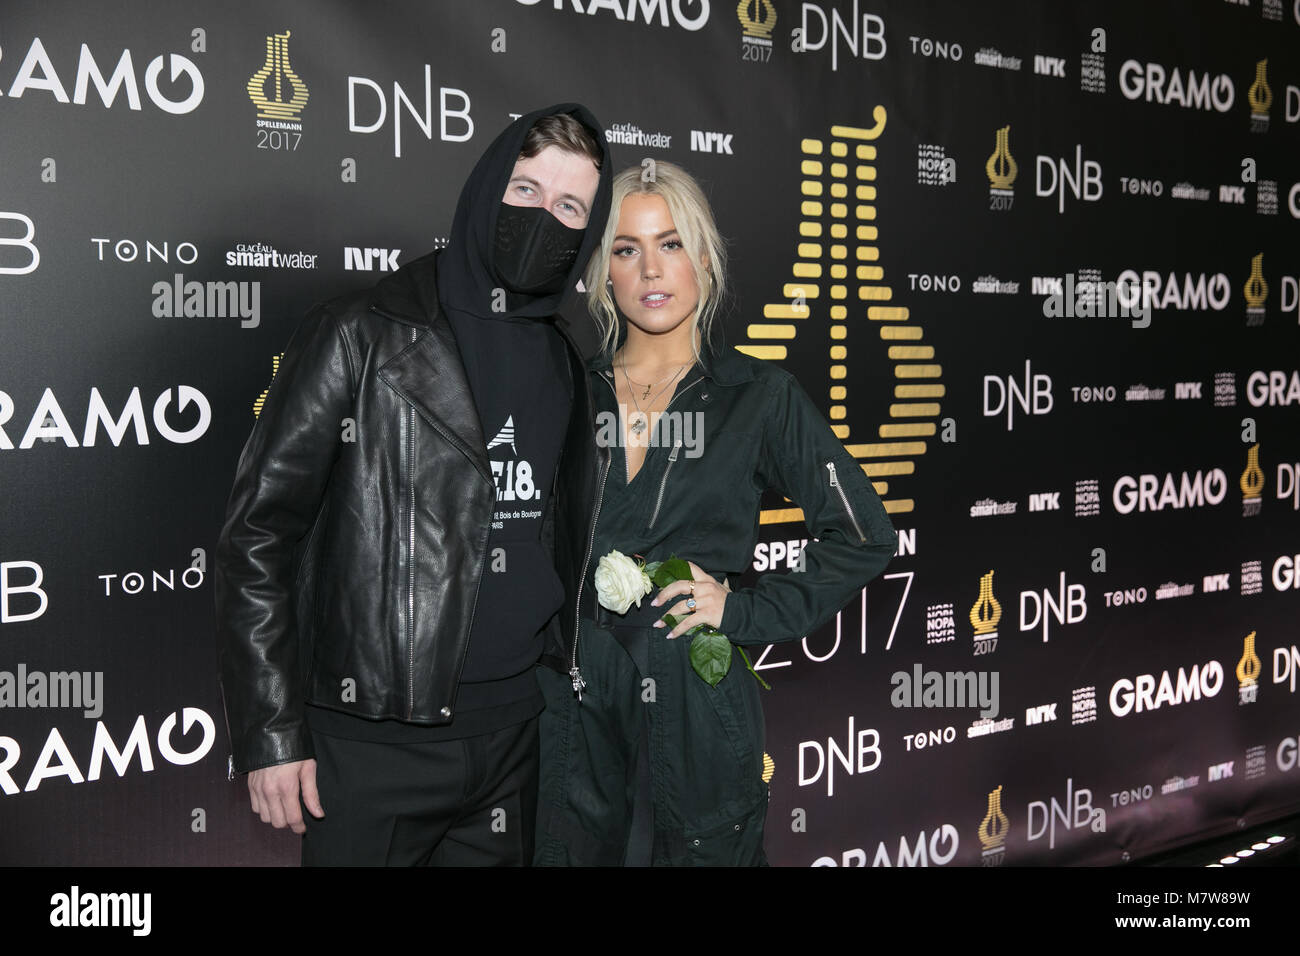 Norway, Oslo - February 25, 2018. The Norwegian record producer Alan Walker and singer Julie Bergan are seen at the red carpet at the Norwegian Grammy Awards, Spellemannprisen 2017, in Oslo. (Photo credit: Gonzales Photo - Stian S. Moller). Stock Photo